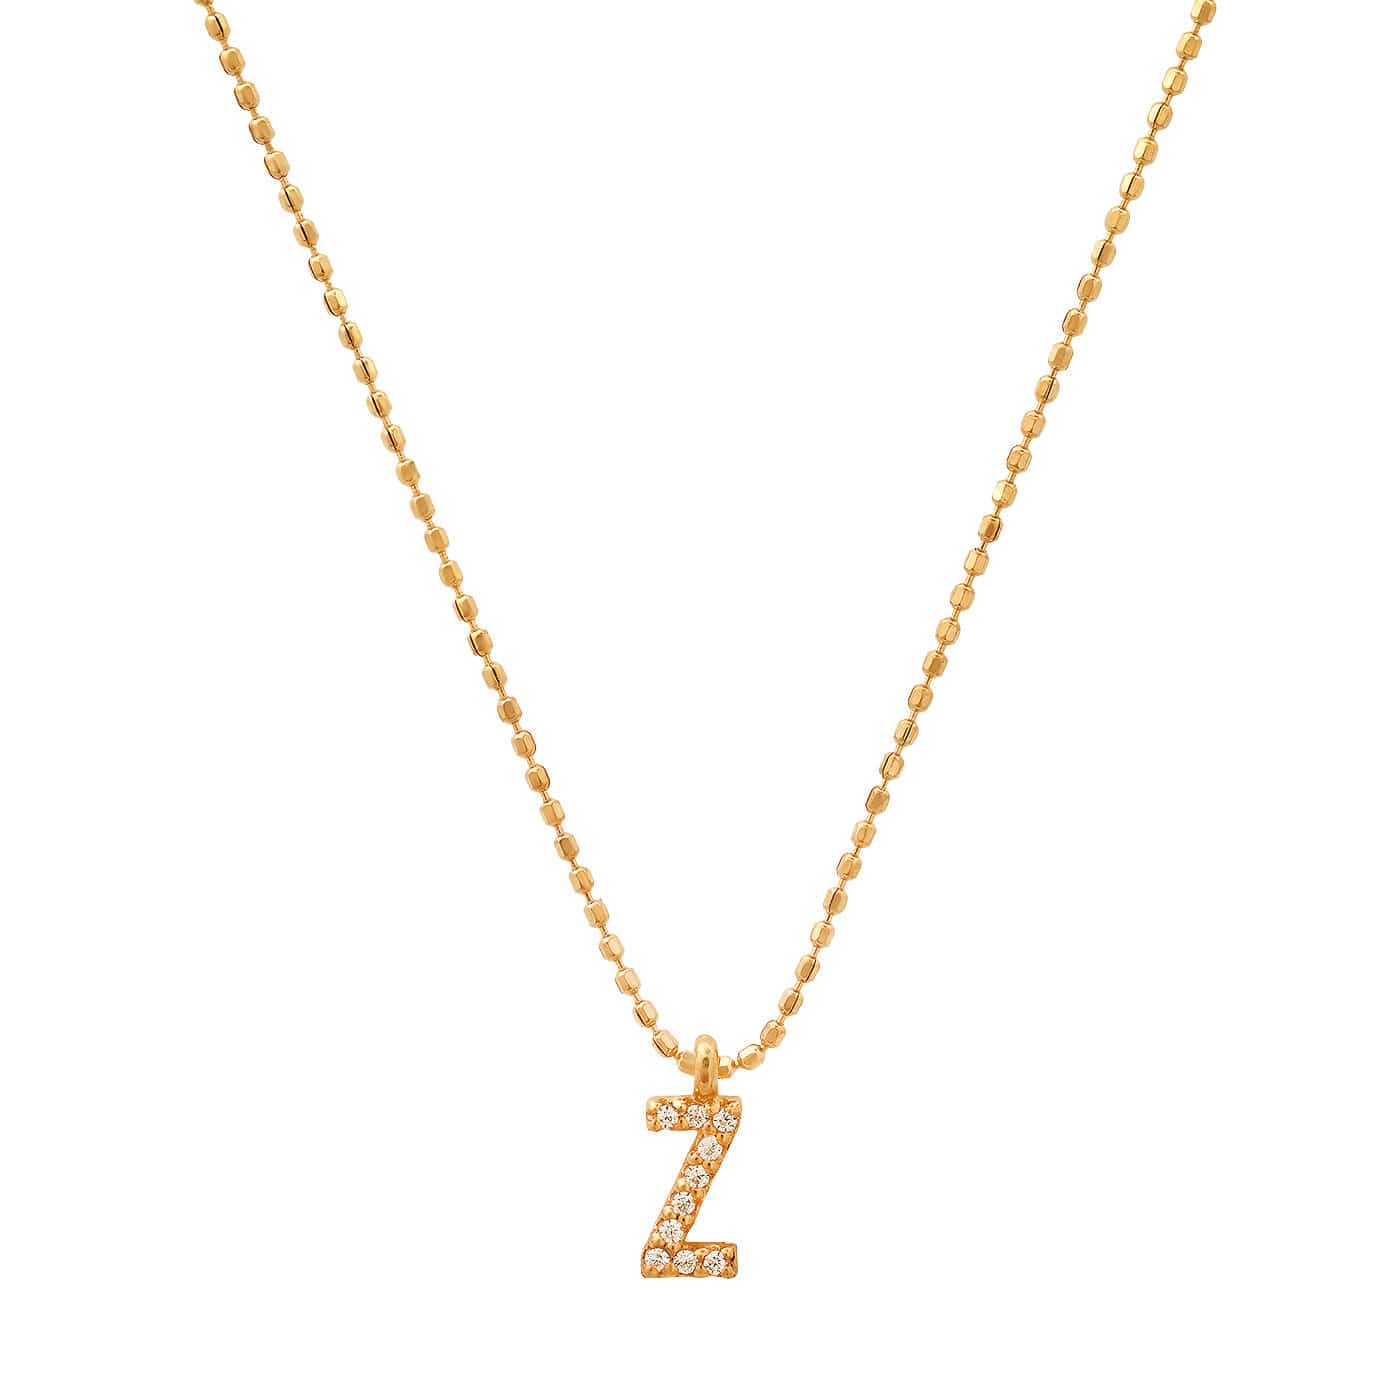 TAI JEWELRY Necklace Z Pave Initial Ball Chain Necklace